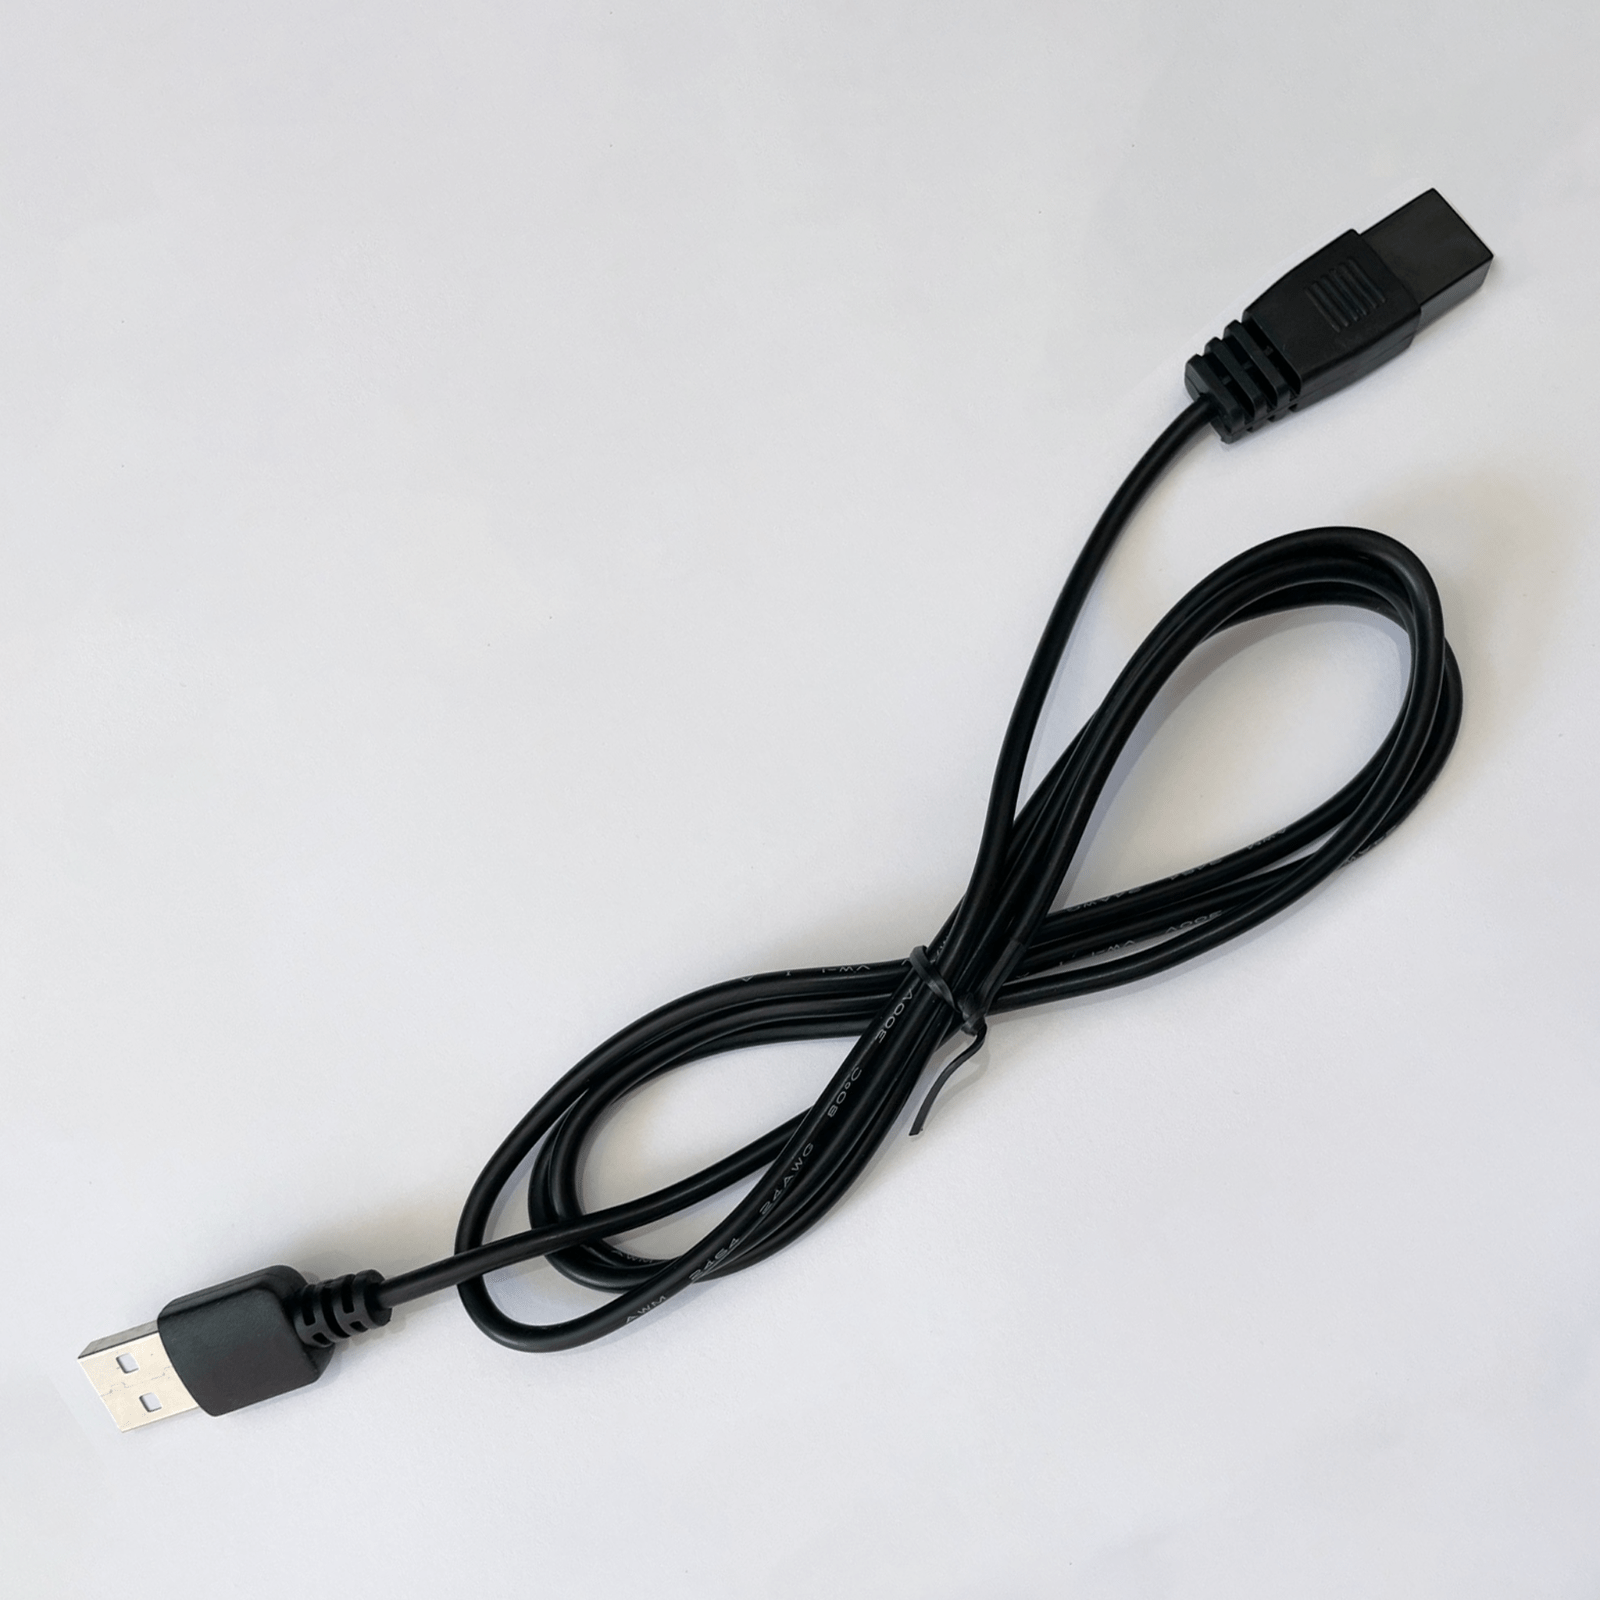 A black Pool Vacuum Charging USB Cable Replacement for Bestway / Lay-Z-Spa on a white surface.